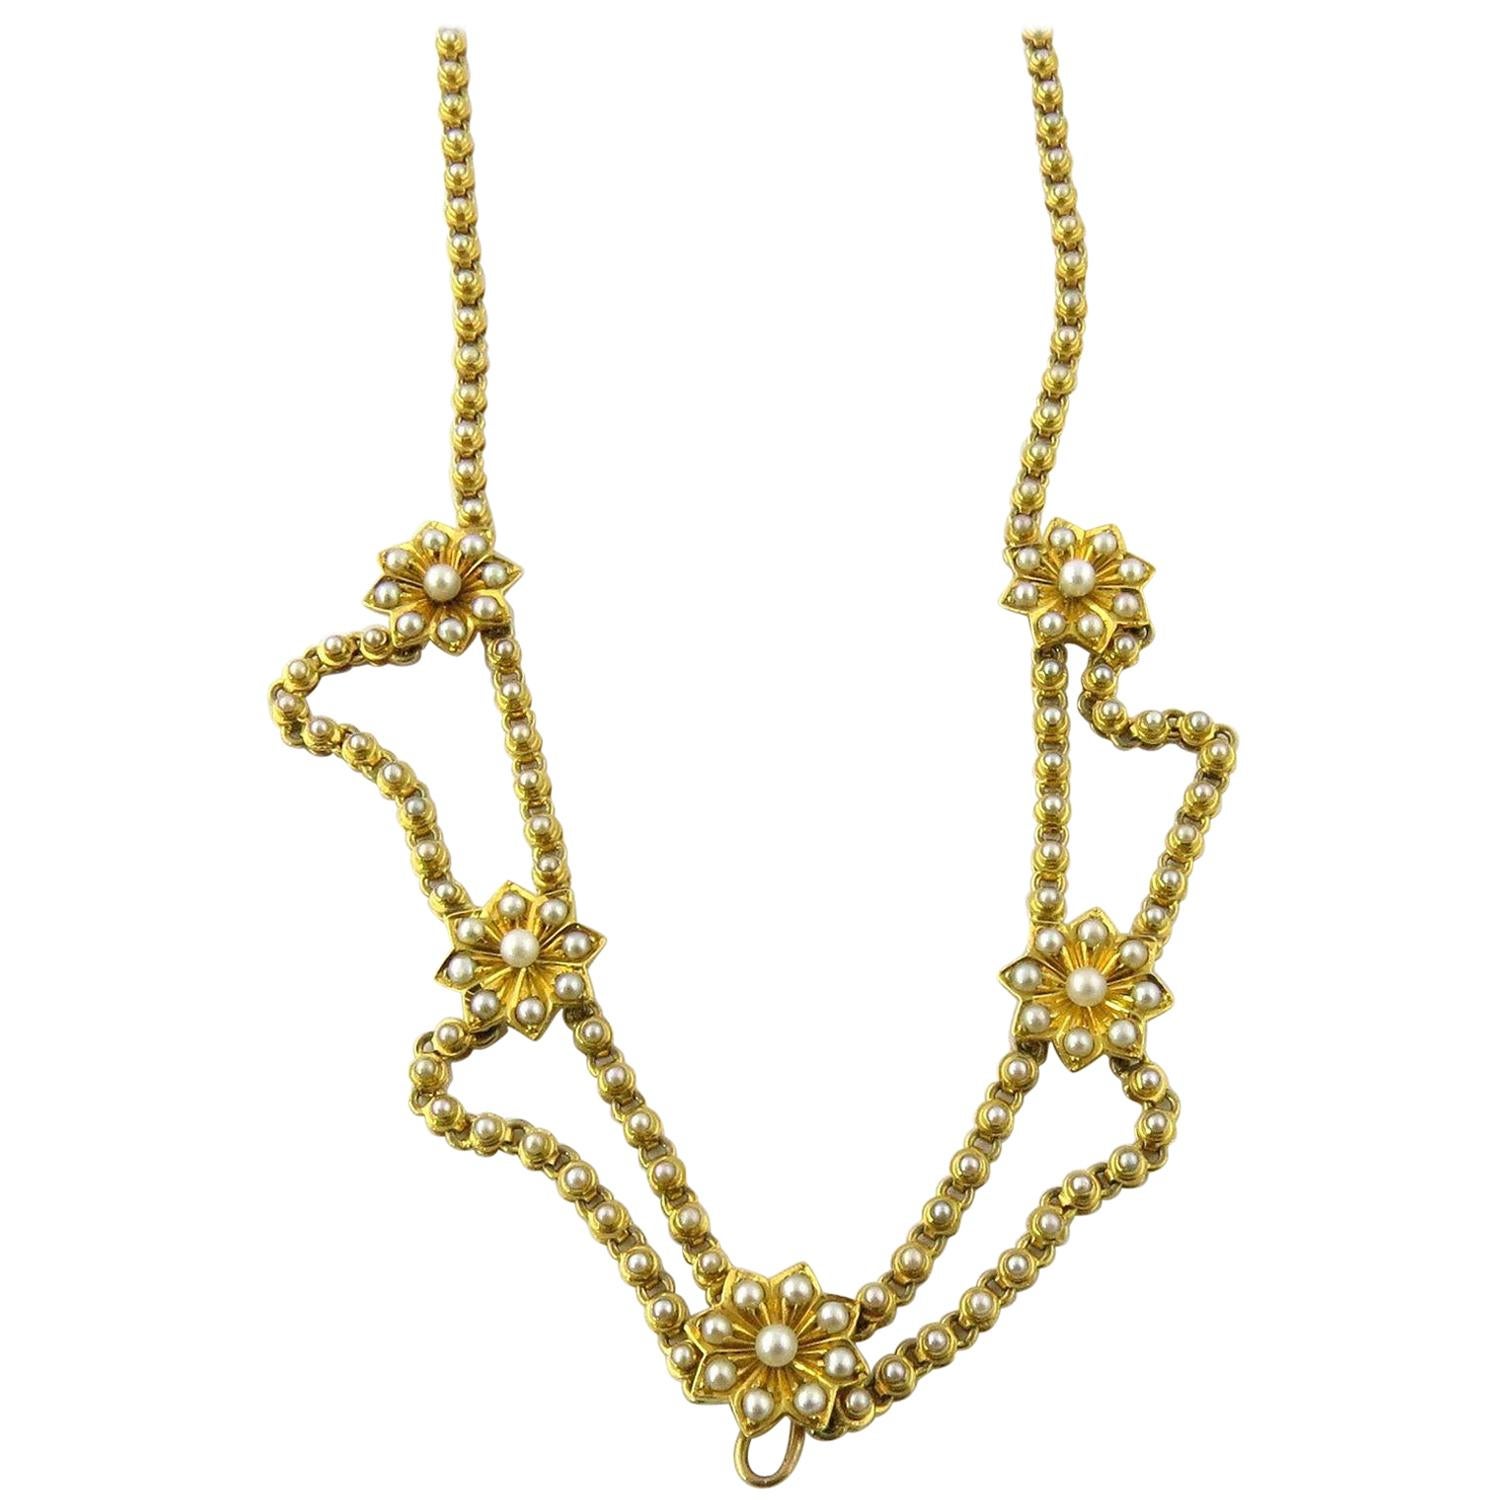 Antique Victorian 14 Karat Yellow Gold Festoon Style Seed Pearl Flower Necklace